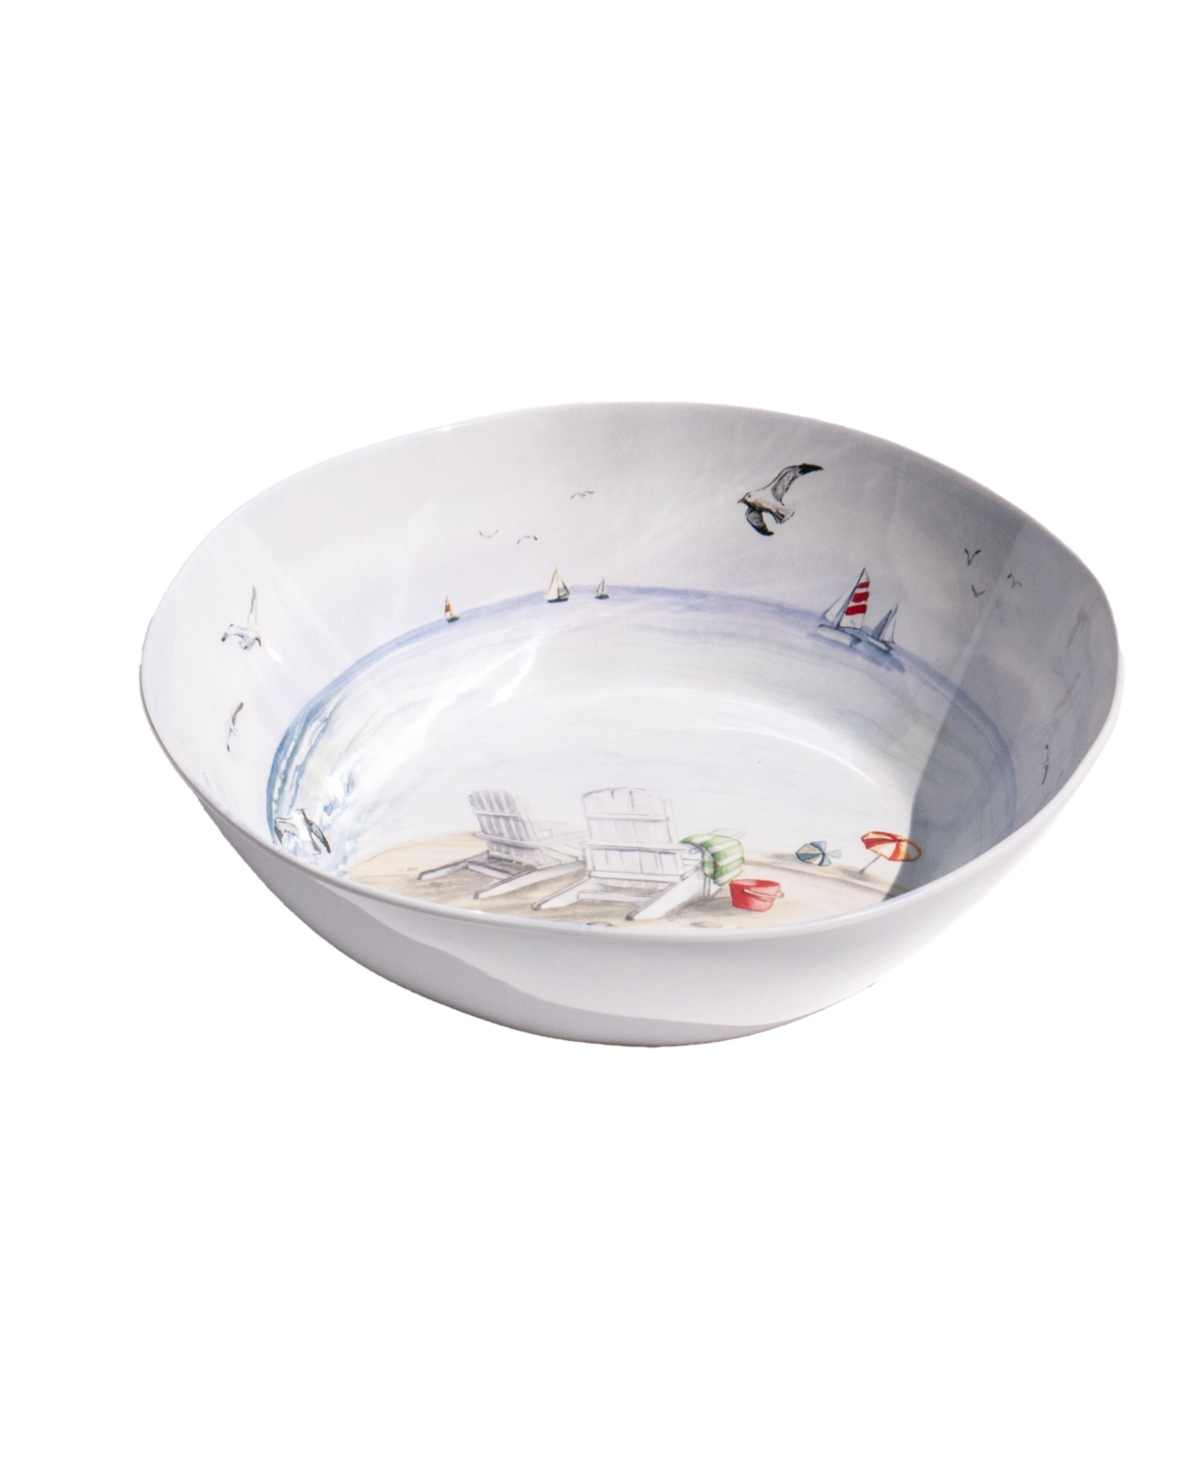 Tarhong By The Shore Serve Bowl 11.9", 142 oz In White